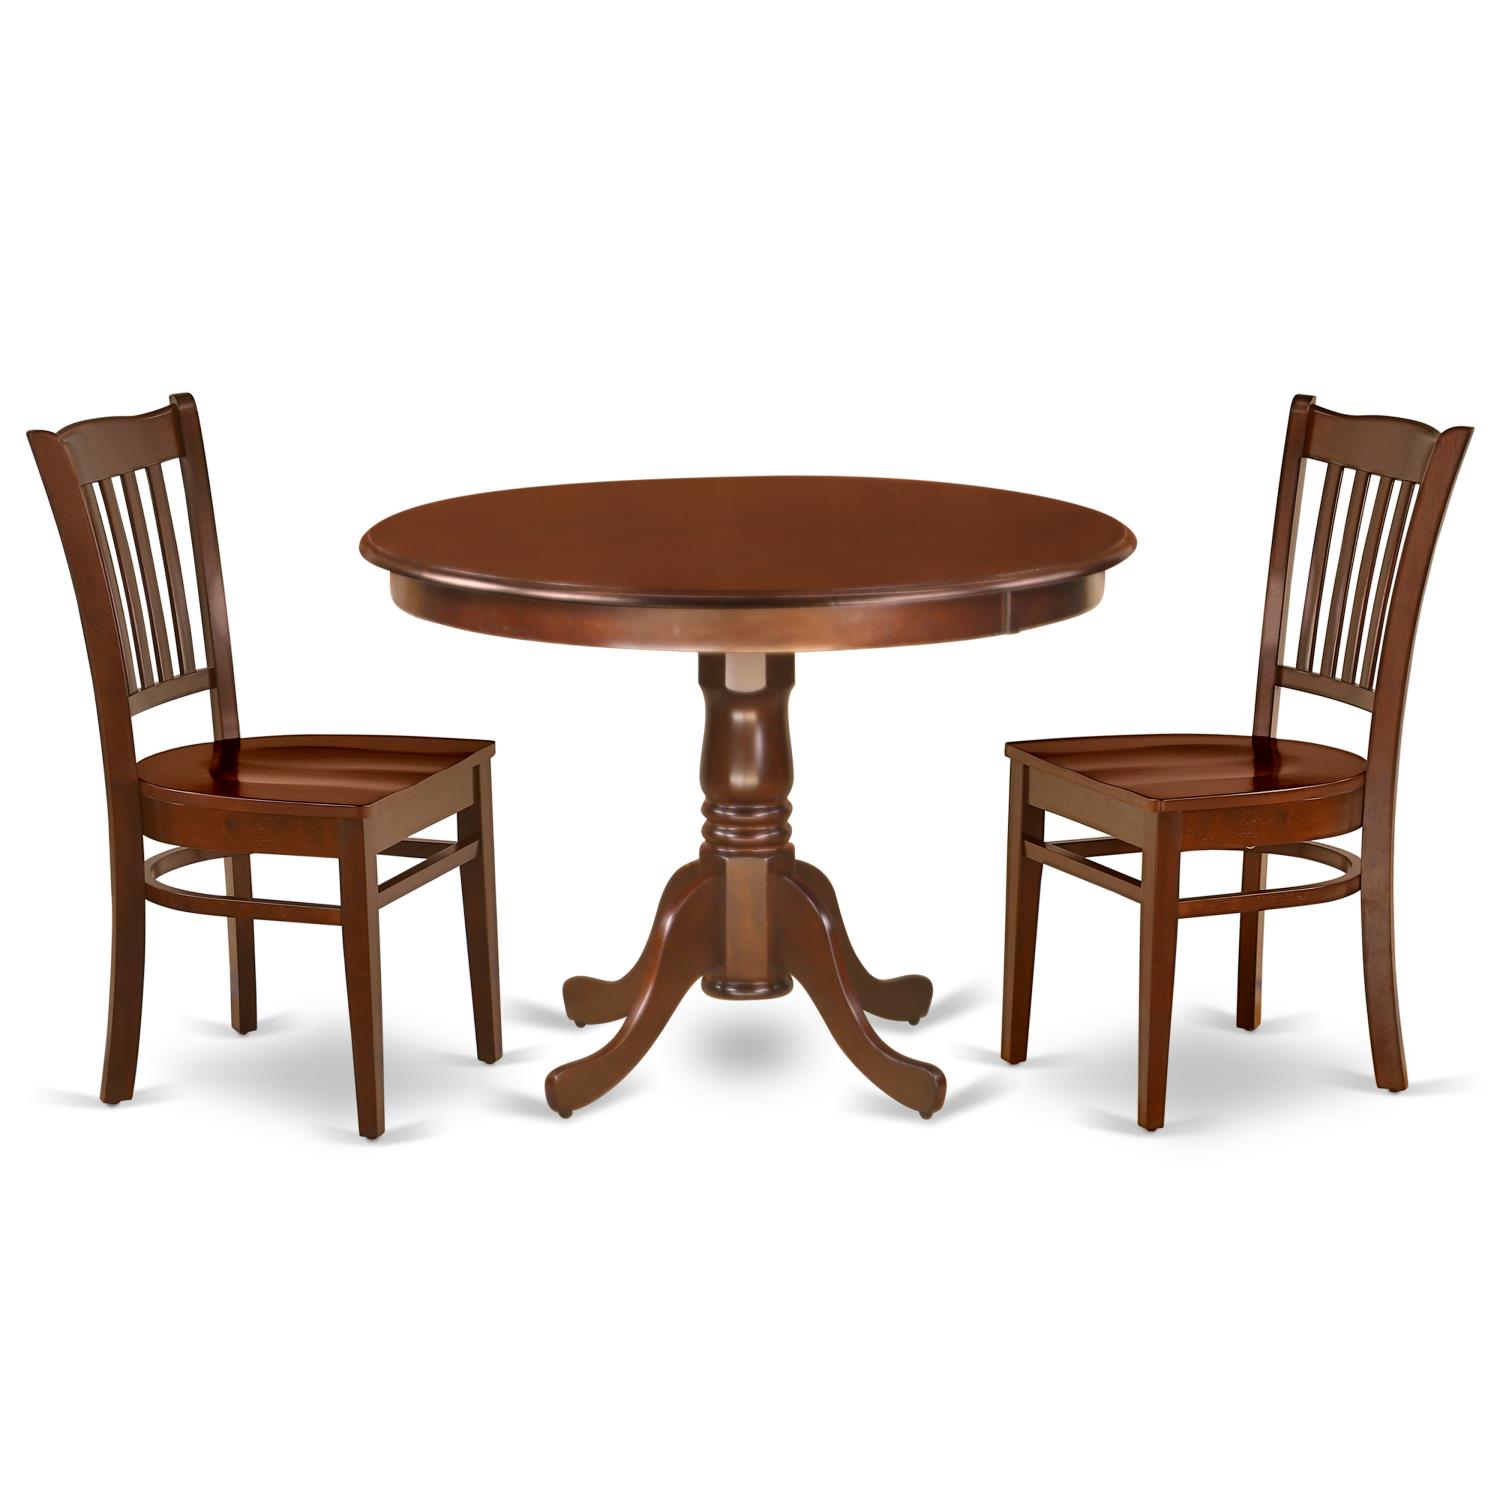 East West Furniture Hartland Wood 3-Piece Dining Set With Mahogany HLGR3-MAH-W